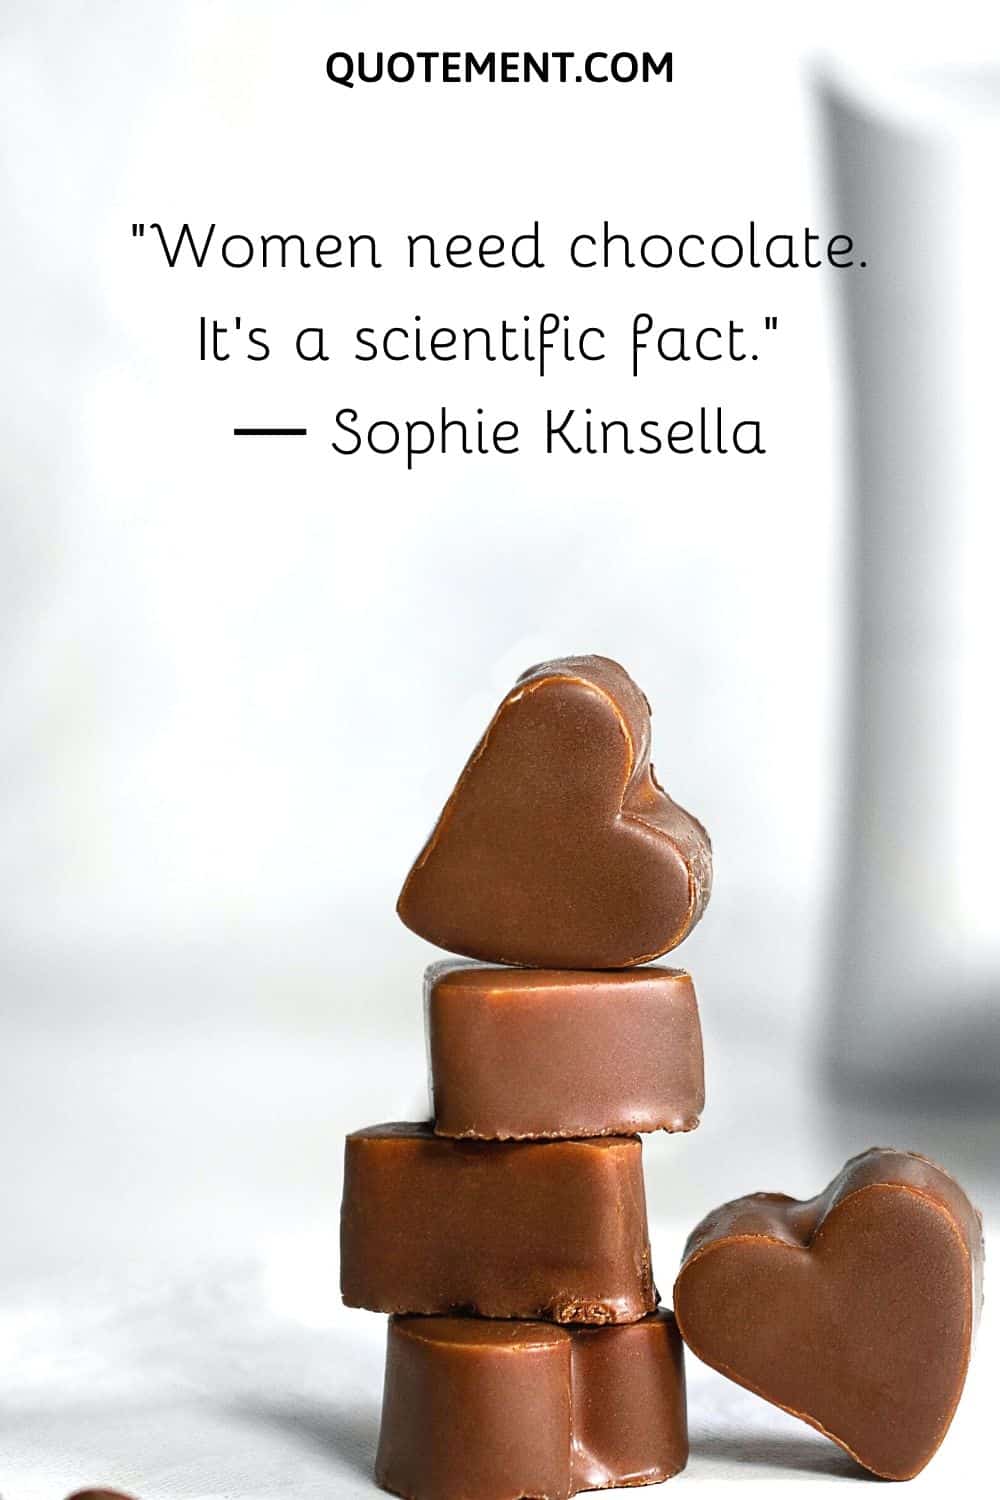 “Women need chocolate. It's a scientific fact.” ― Sophie Kinsella